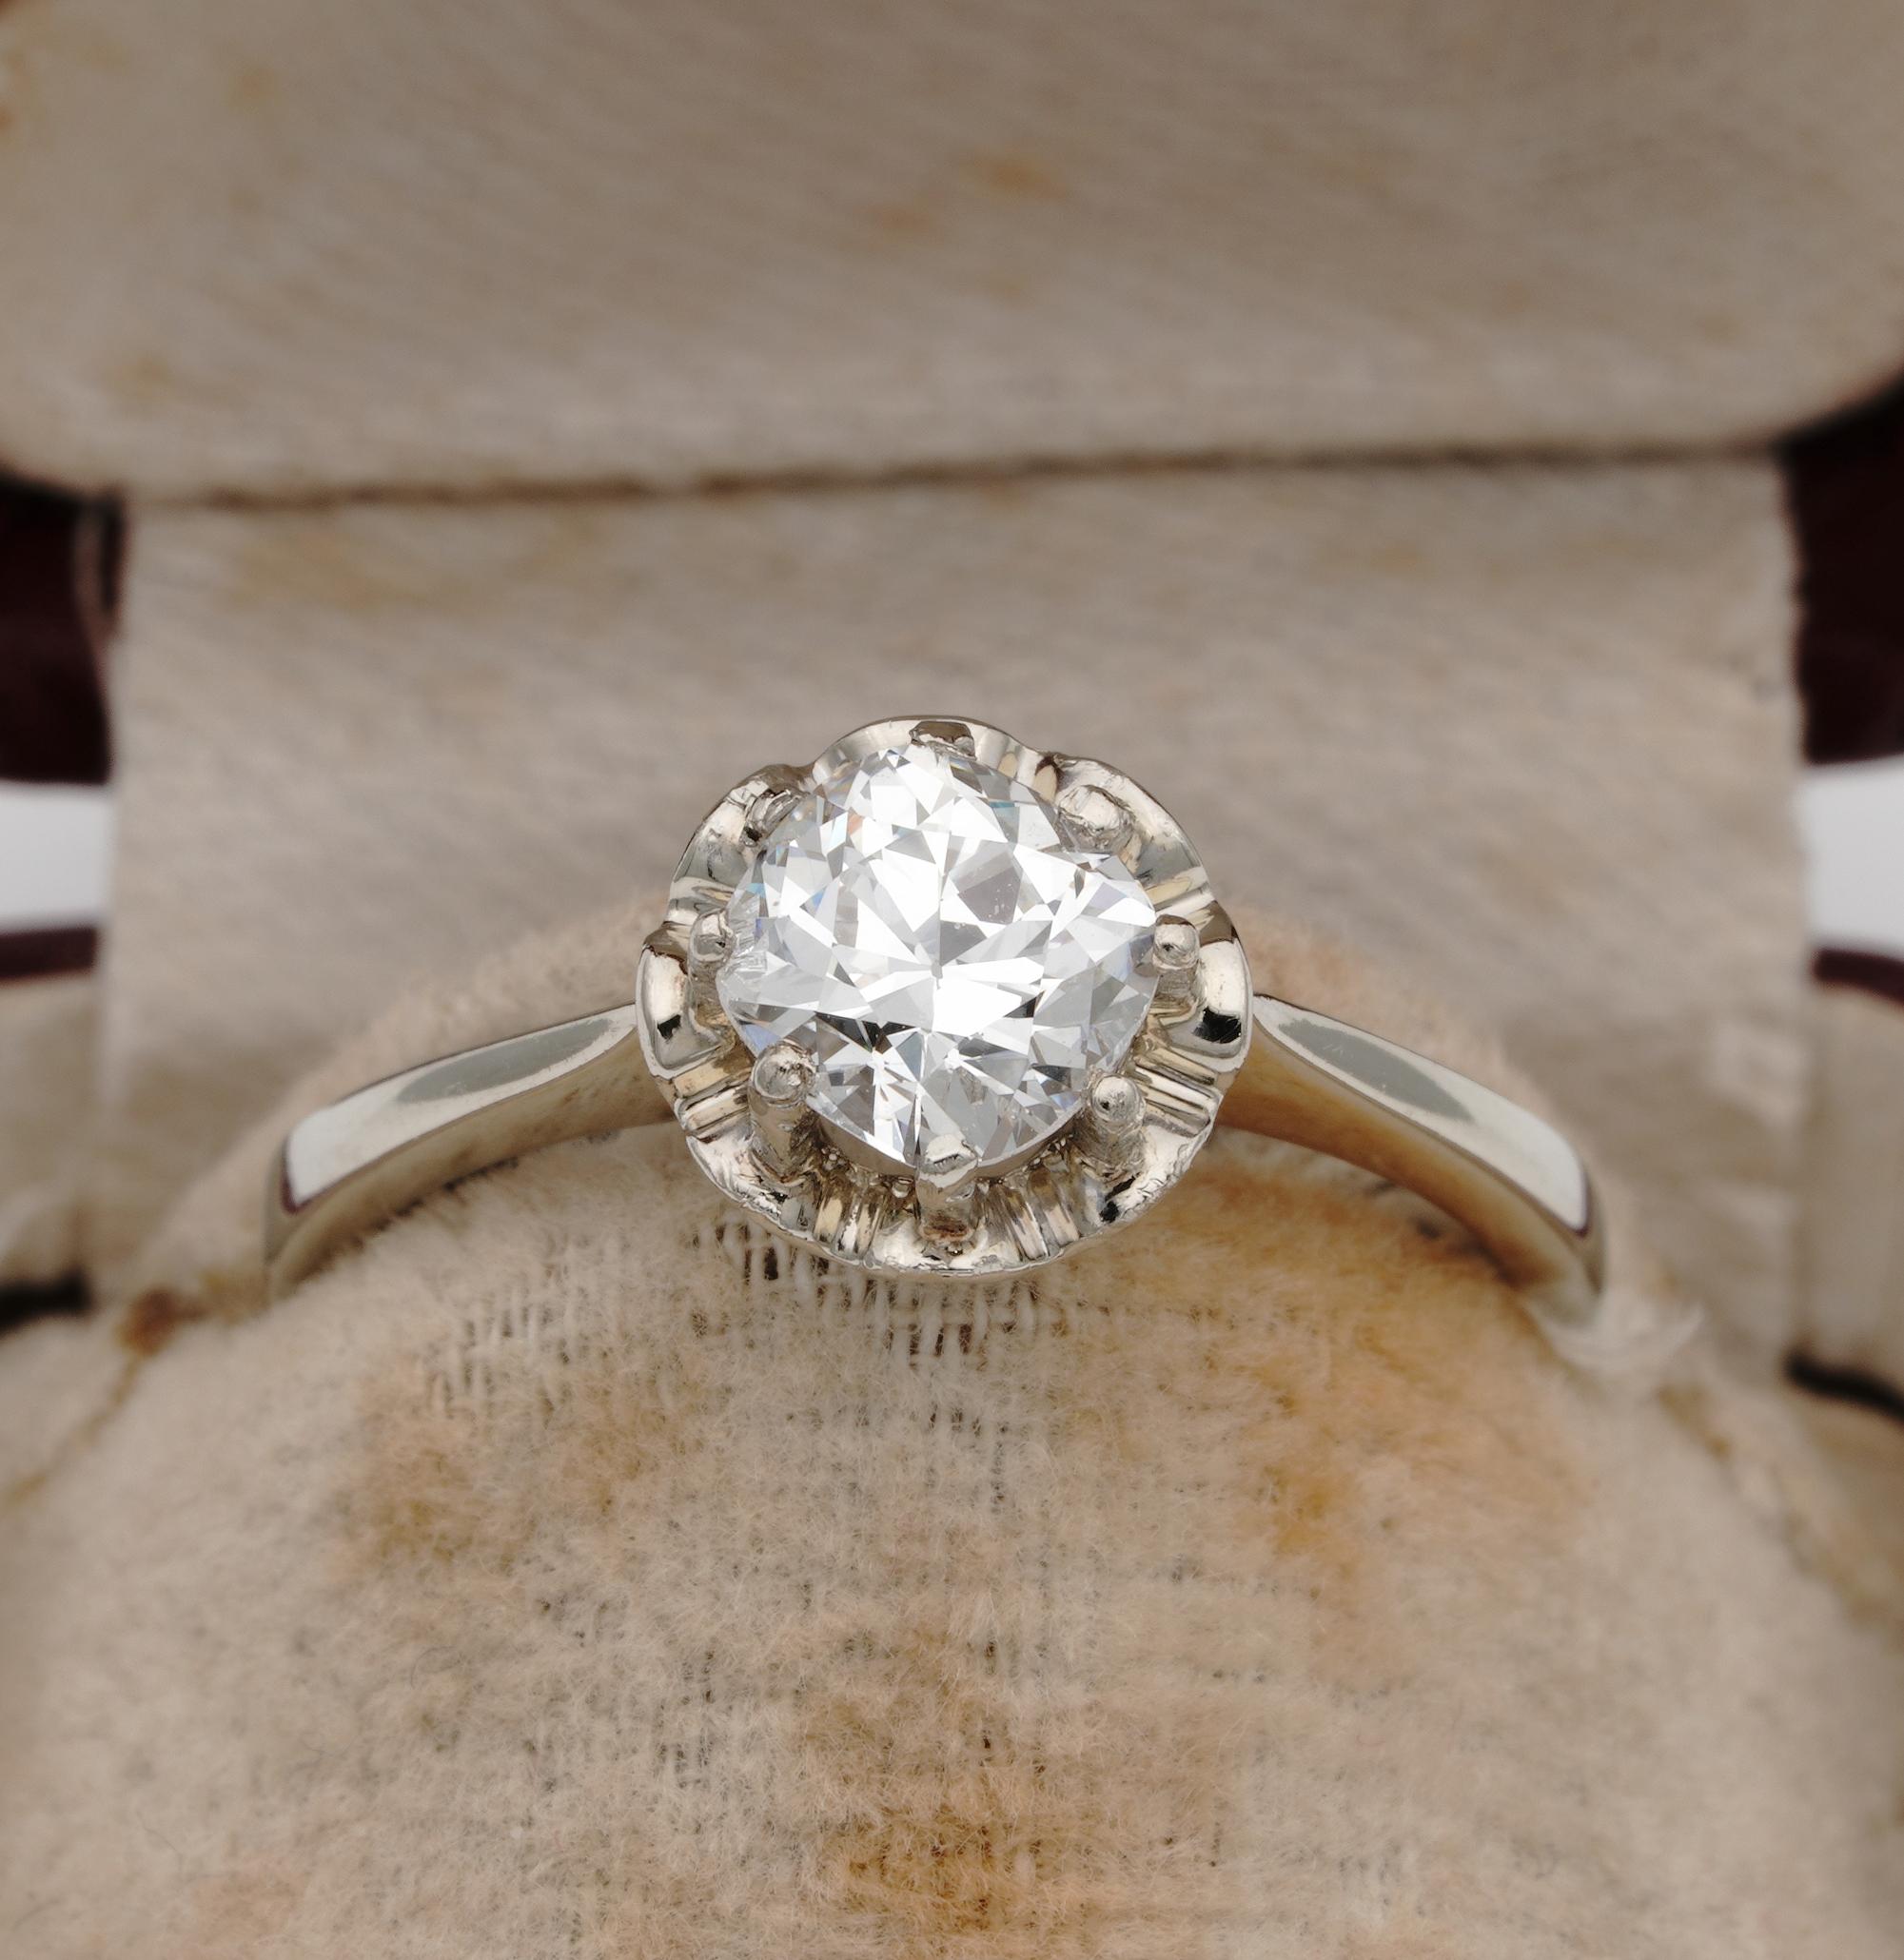 This classy late Art Deco Diamond solitaire ring is 1930 ca
Traditional flower head mount with plain shank exquisitely hand made of solid 18 Kt gold
Center Diamond is a bright white full of sparkle old European cut rather cushion in cut, it is a